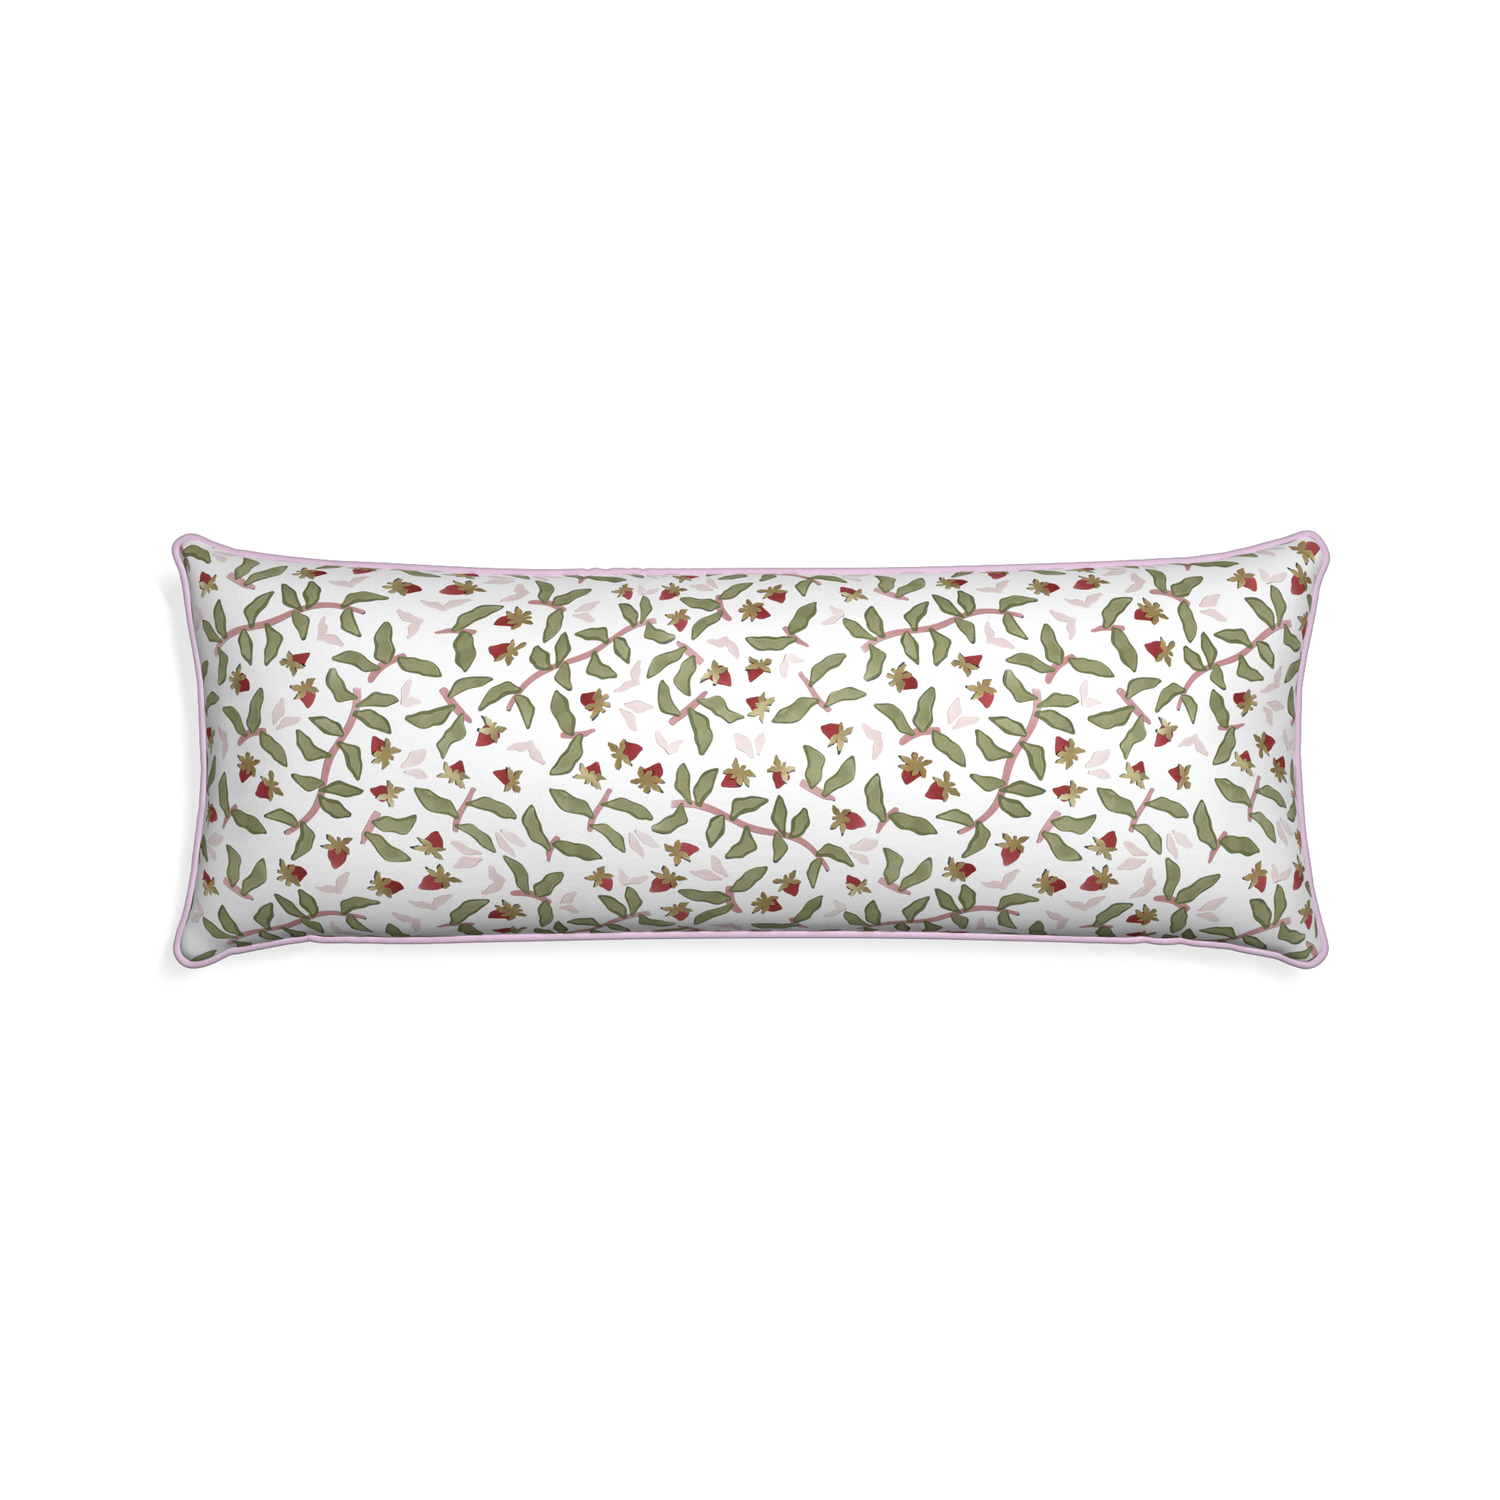 Xl-lumbar nellie custom pillow with l piping on white background